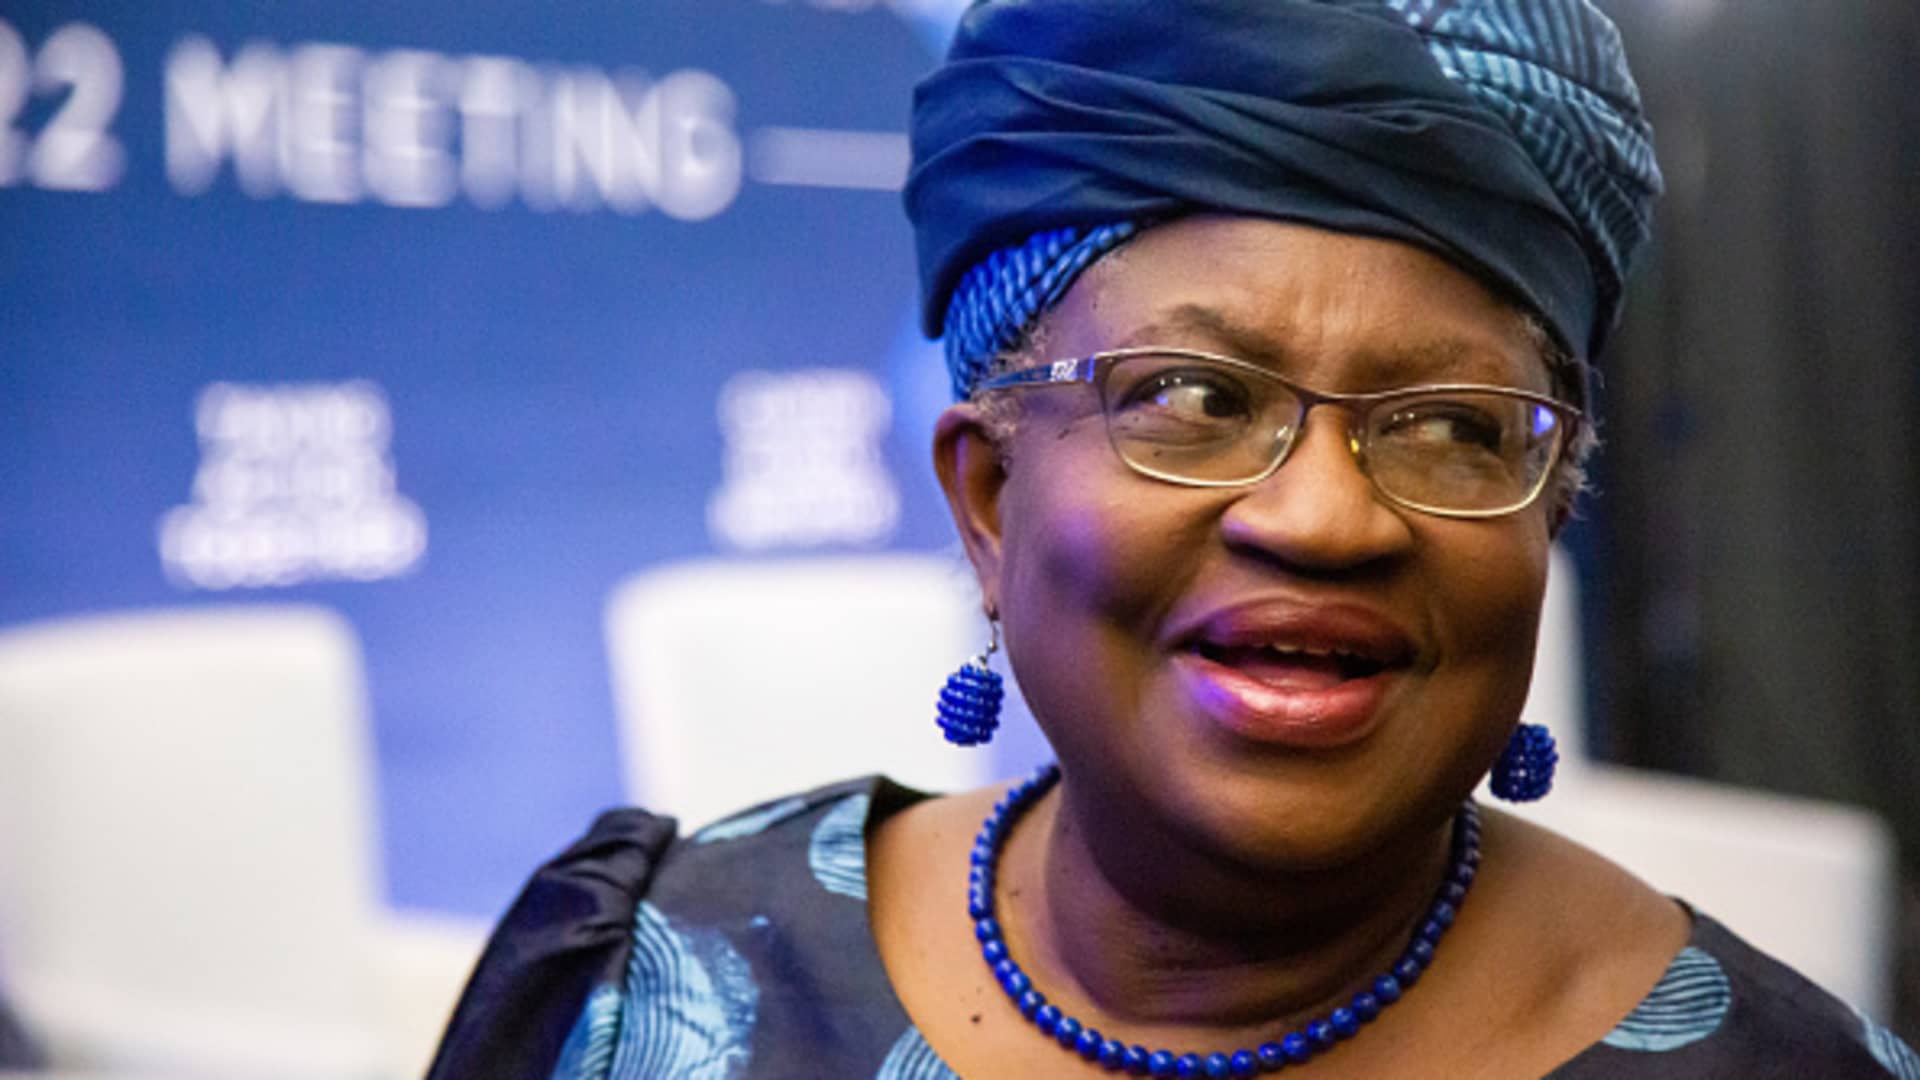 Ngozi Okonjo-Iweala, director general of the World Trade Organization (WTO), speaks during the Clinton Global Initiative (CGI) annual meeting in New York, on Monday, Sept. 19, 2022.